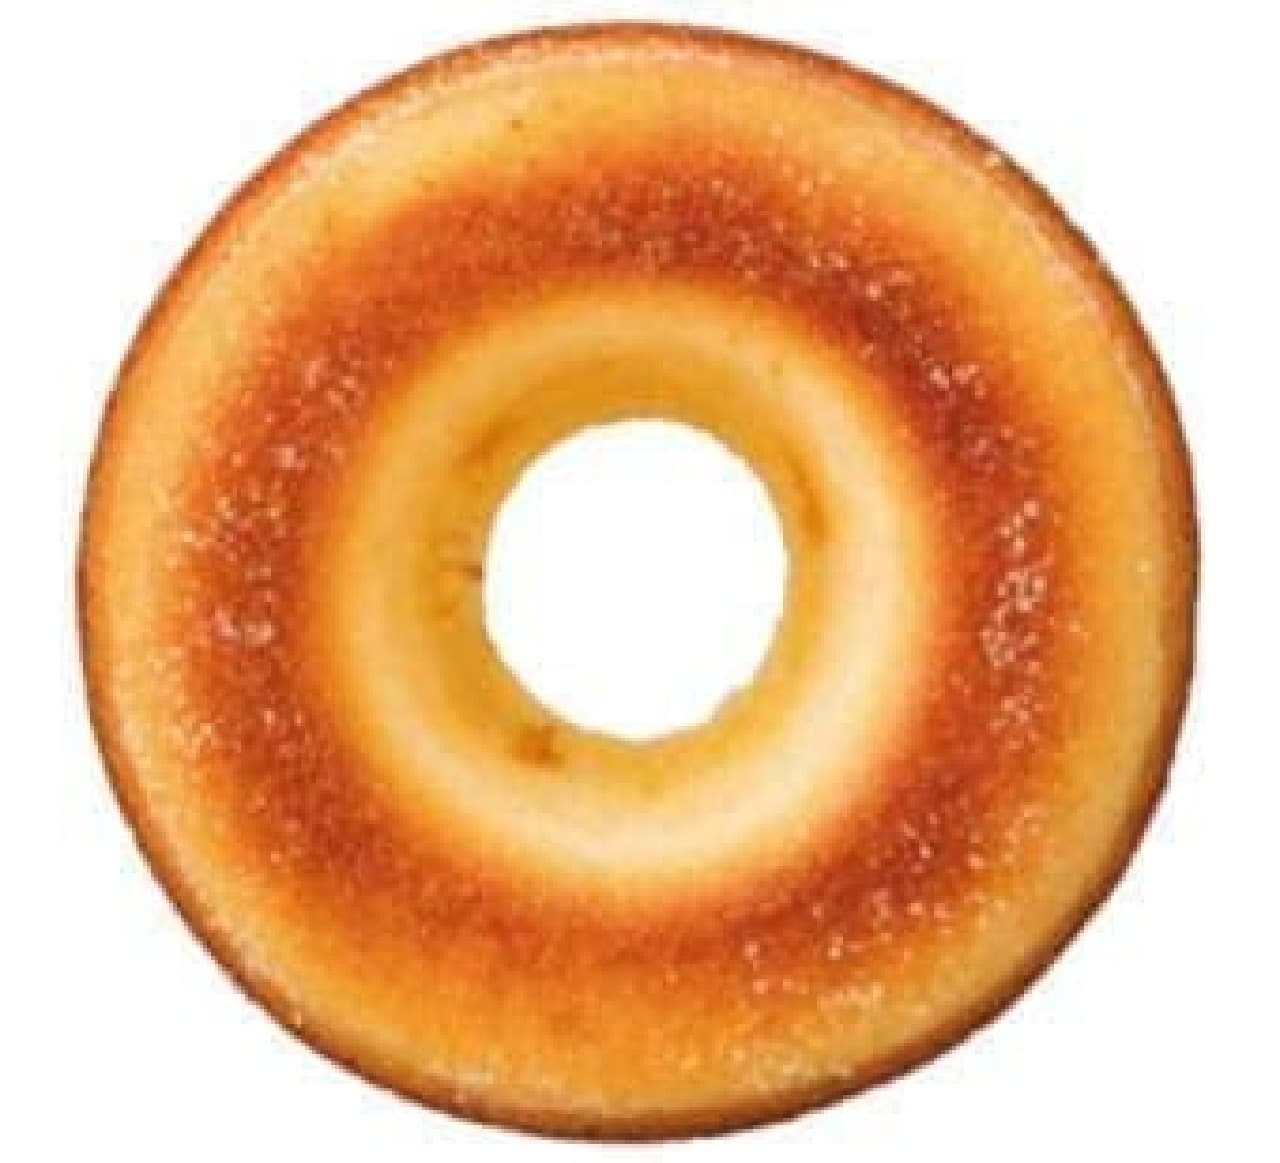 7-ELEVEN baked ring